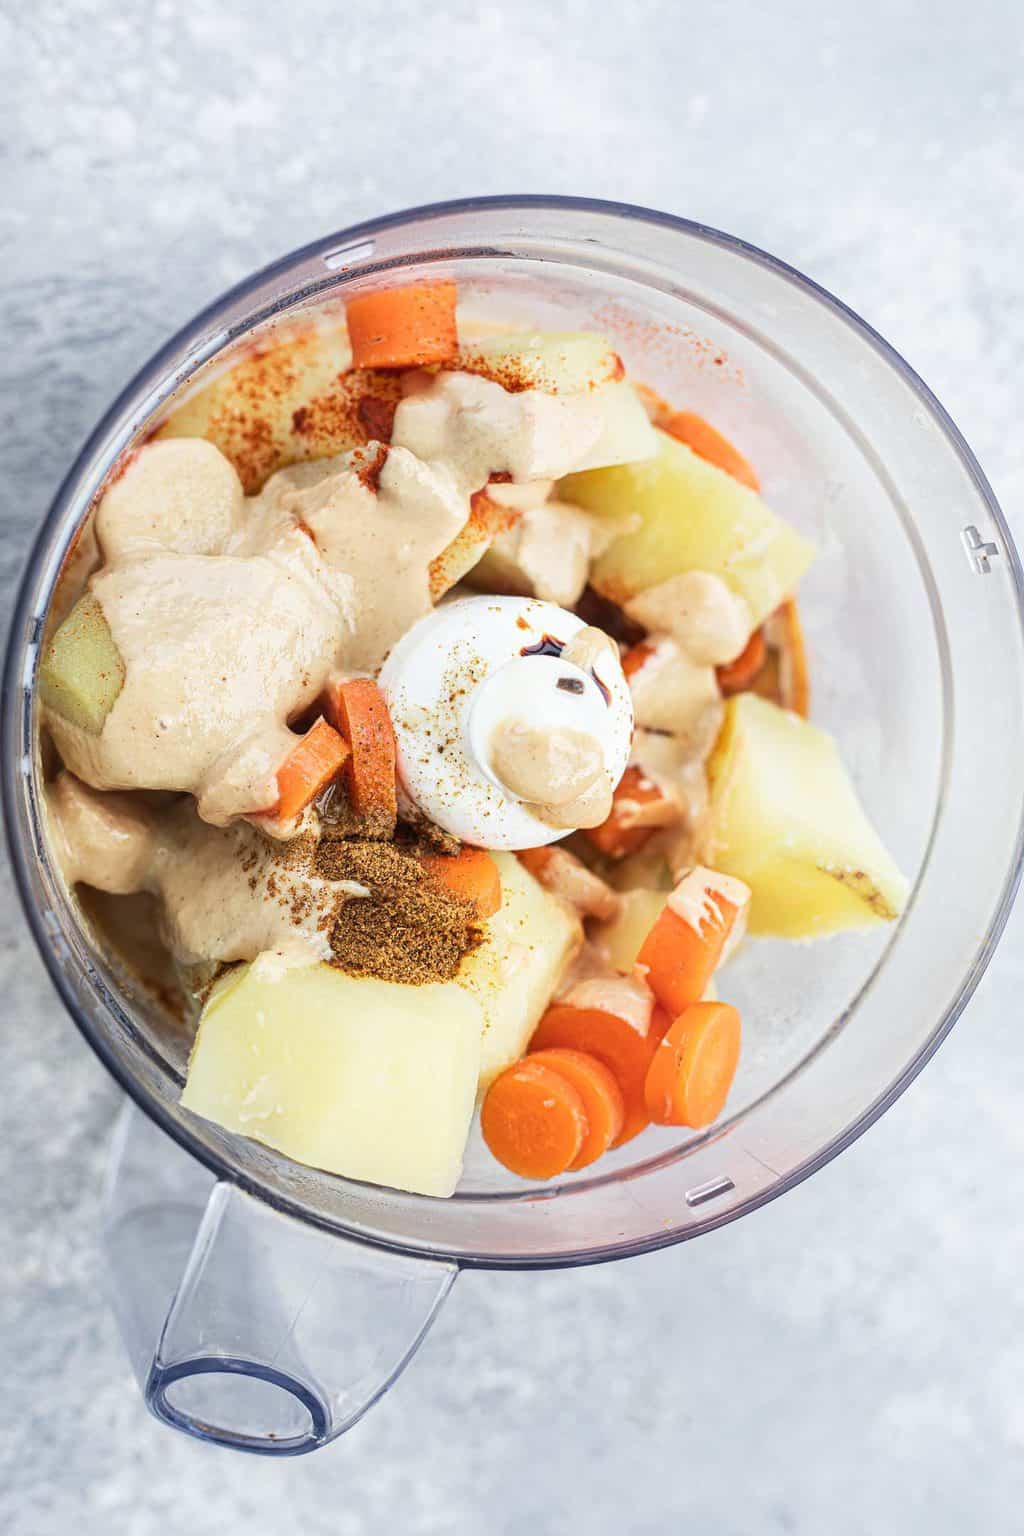 Potatoes and carrots with spices in a food processor